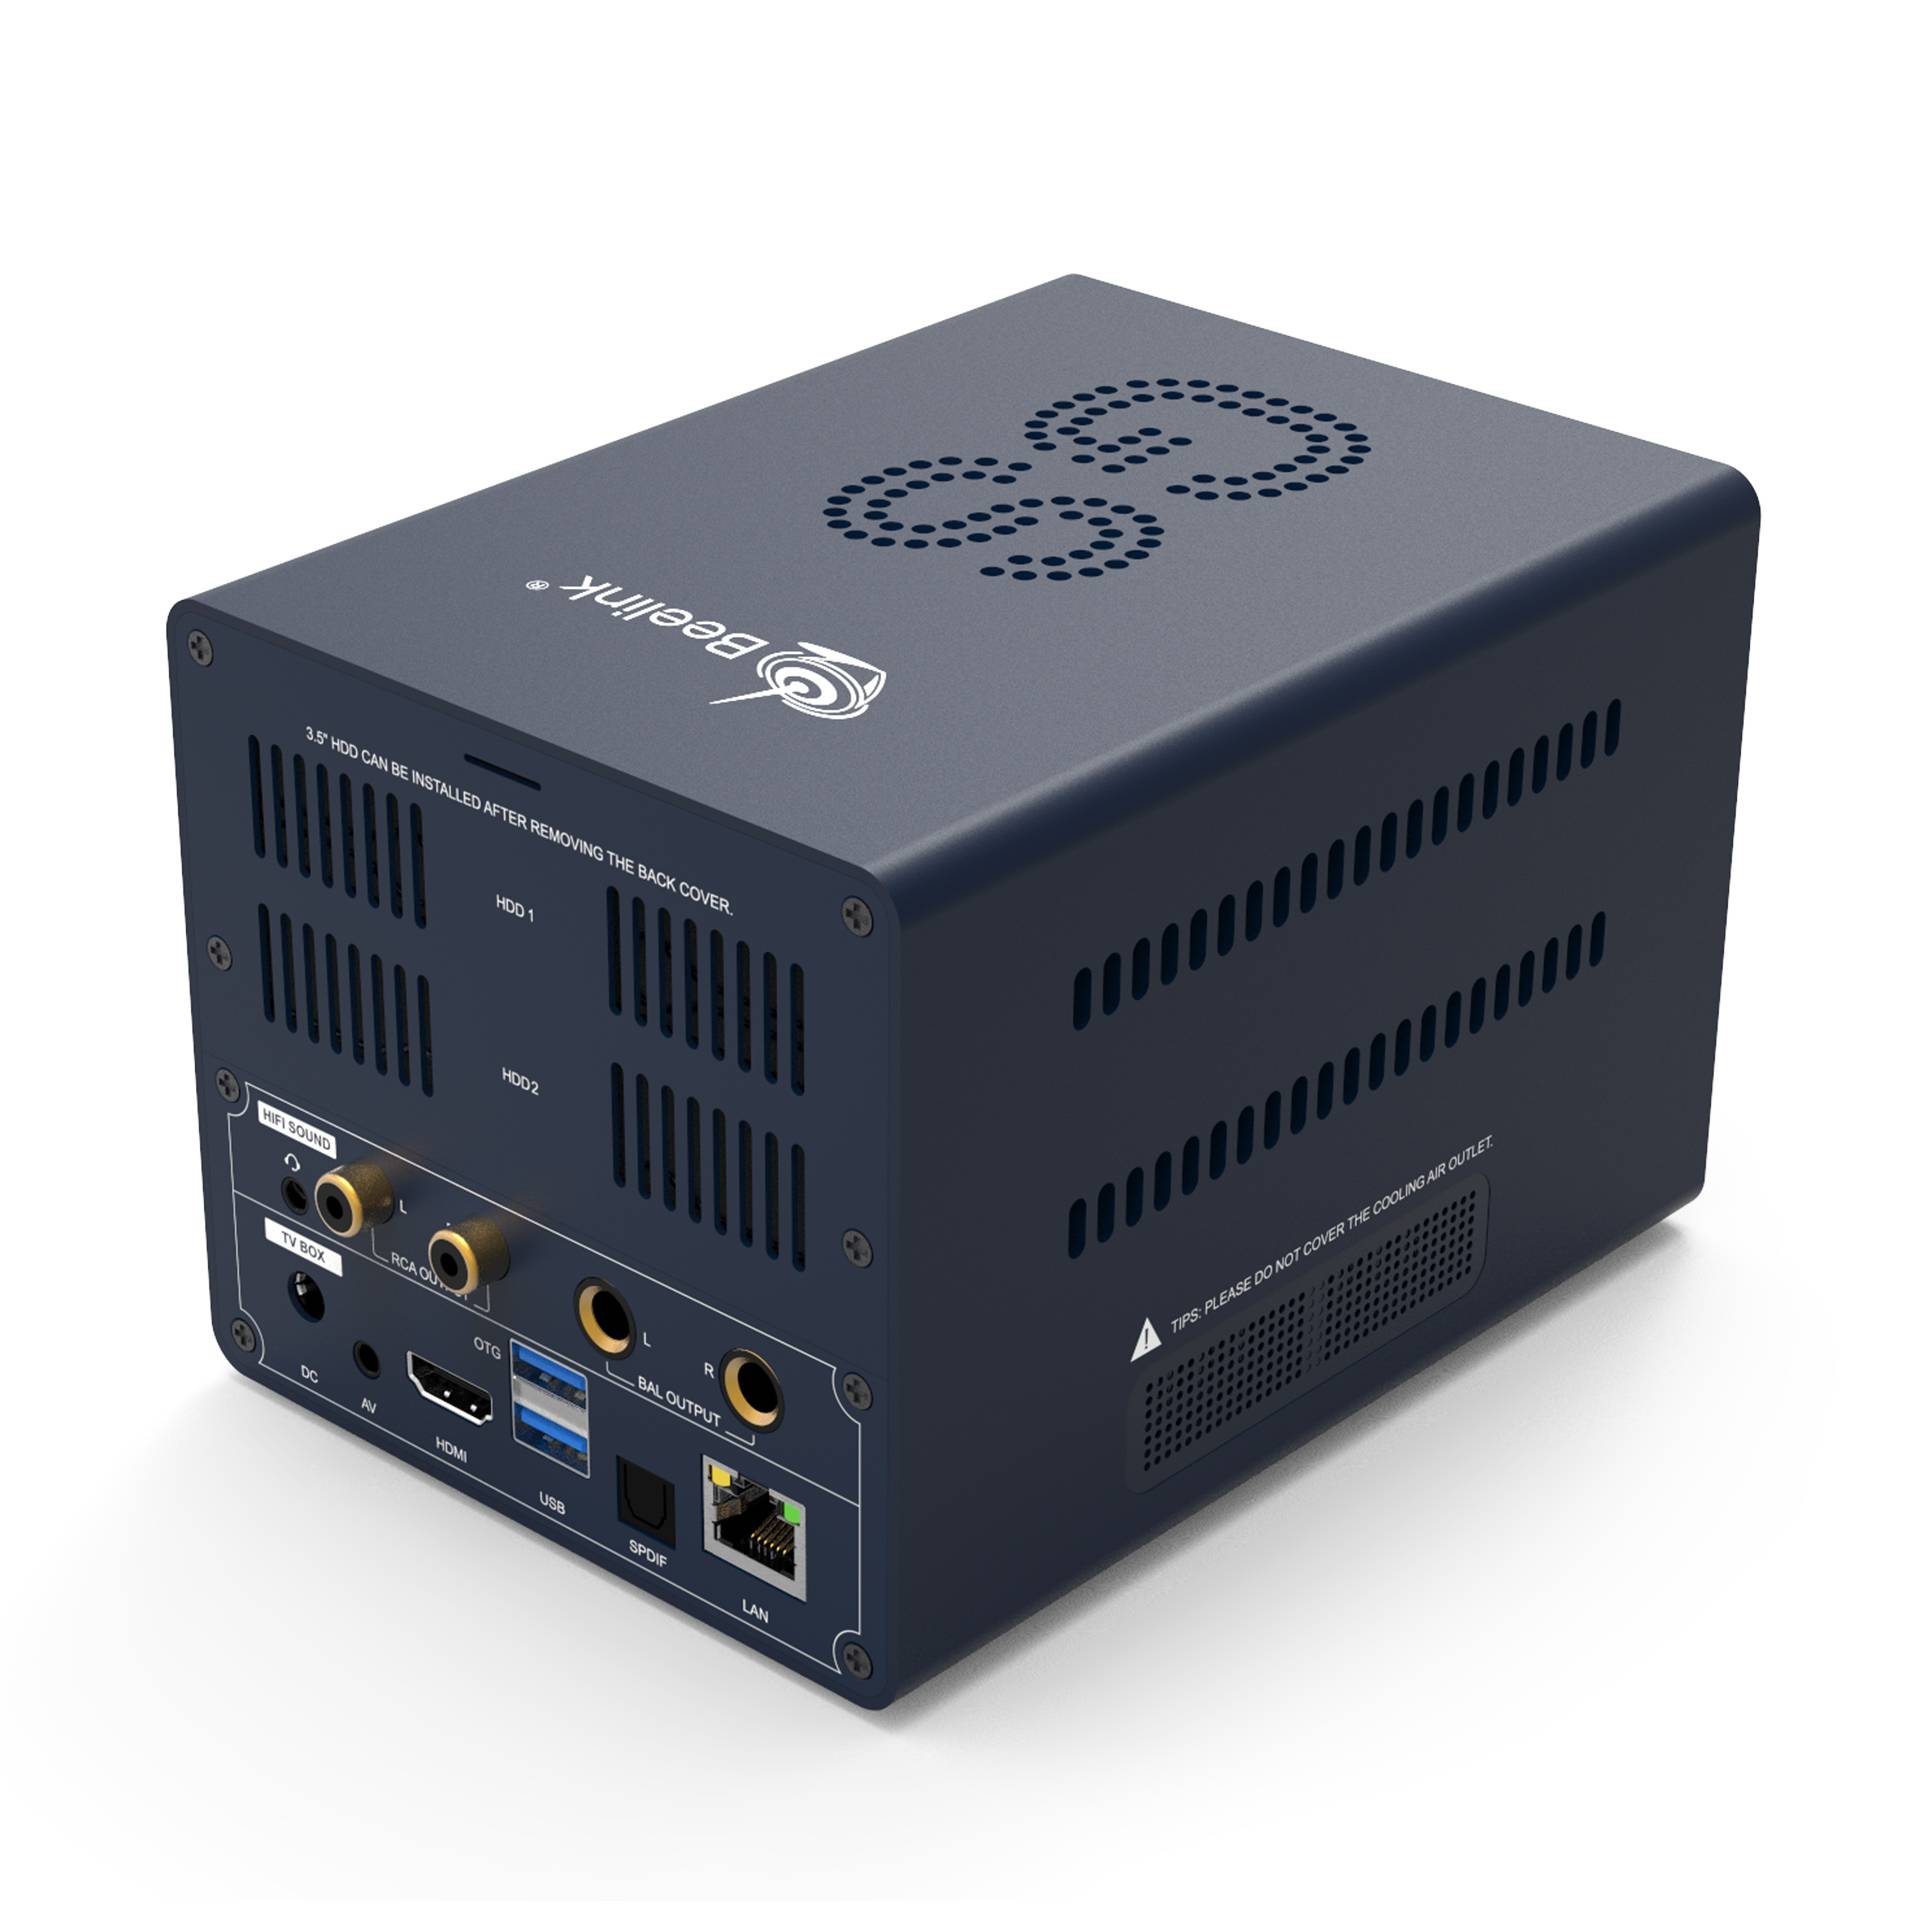 Beelink GS-King X Android BOX with Nas - Showing rear I/O with Audio Output, DC, DV, HDMI,LAN,SPDIF and USB Ports at angle